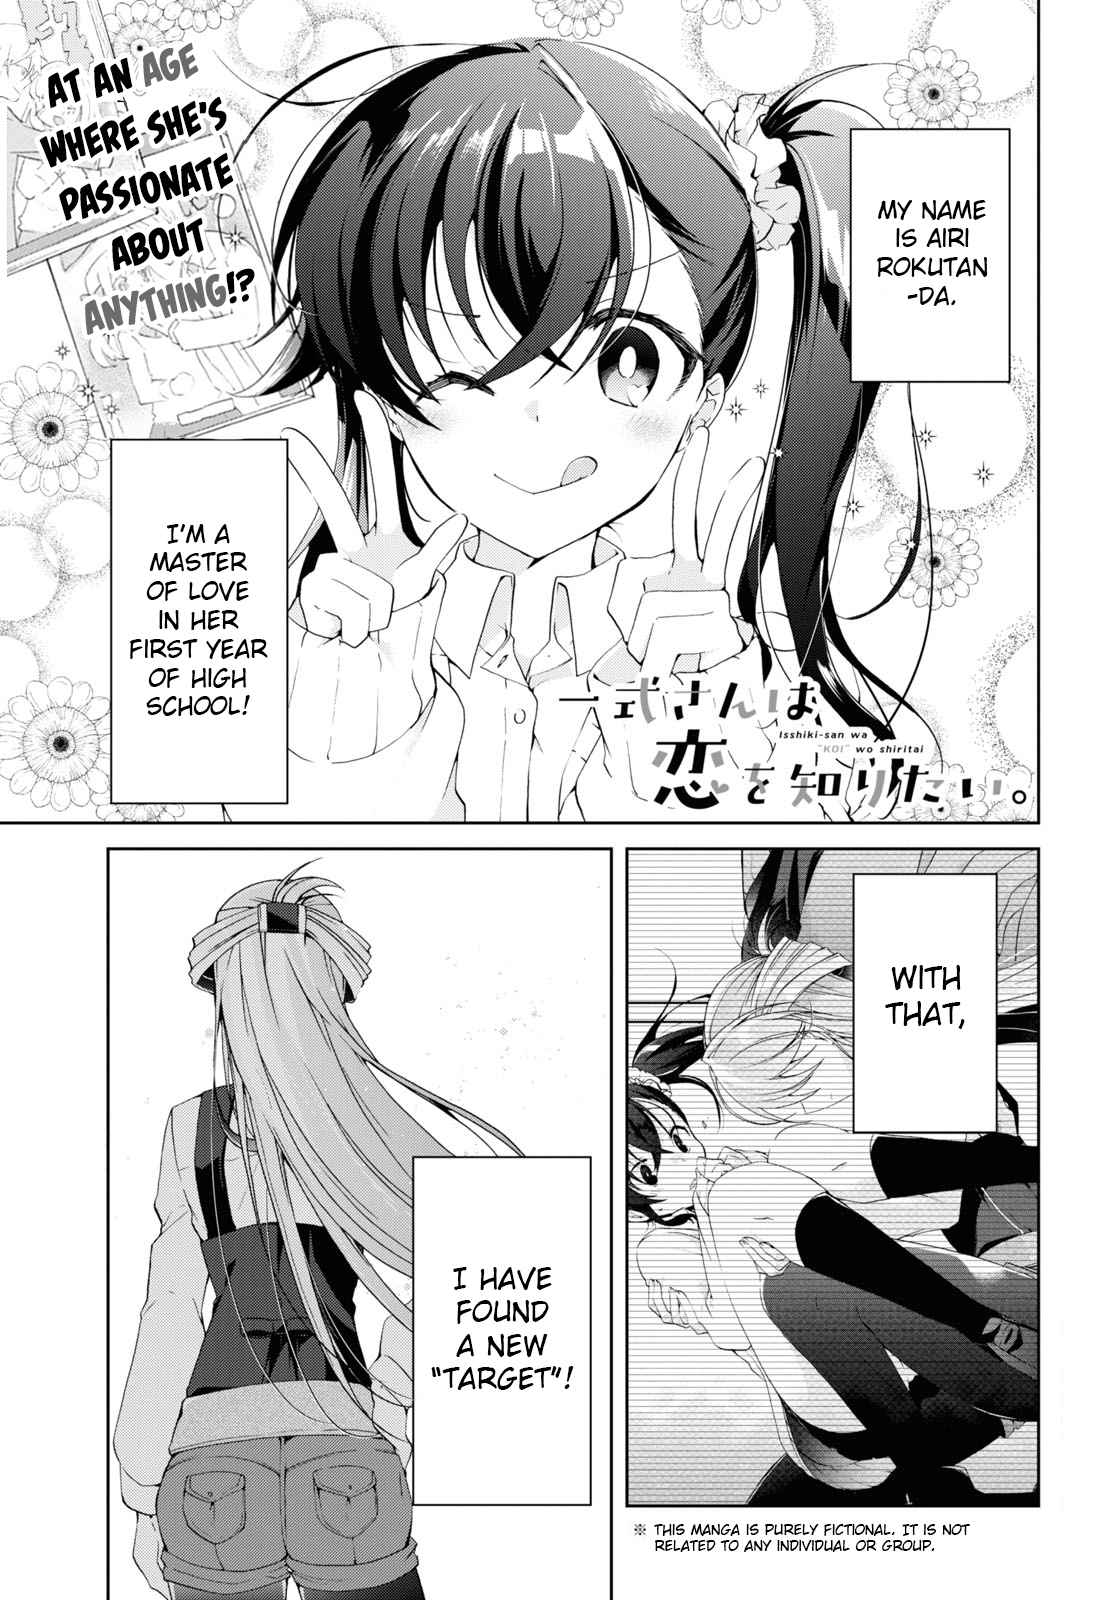 Isshiki-san Wants to Know About Love. - chapter 9 - #1